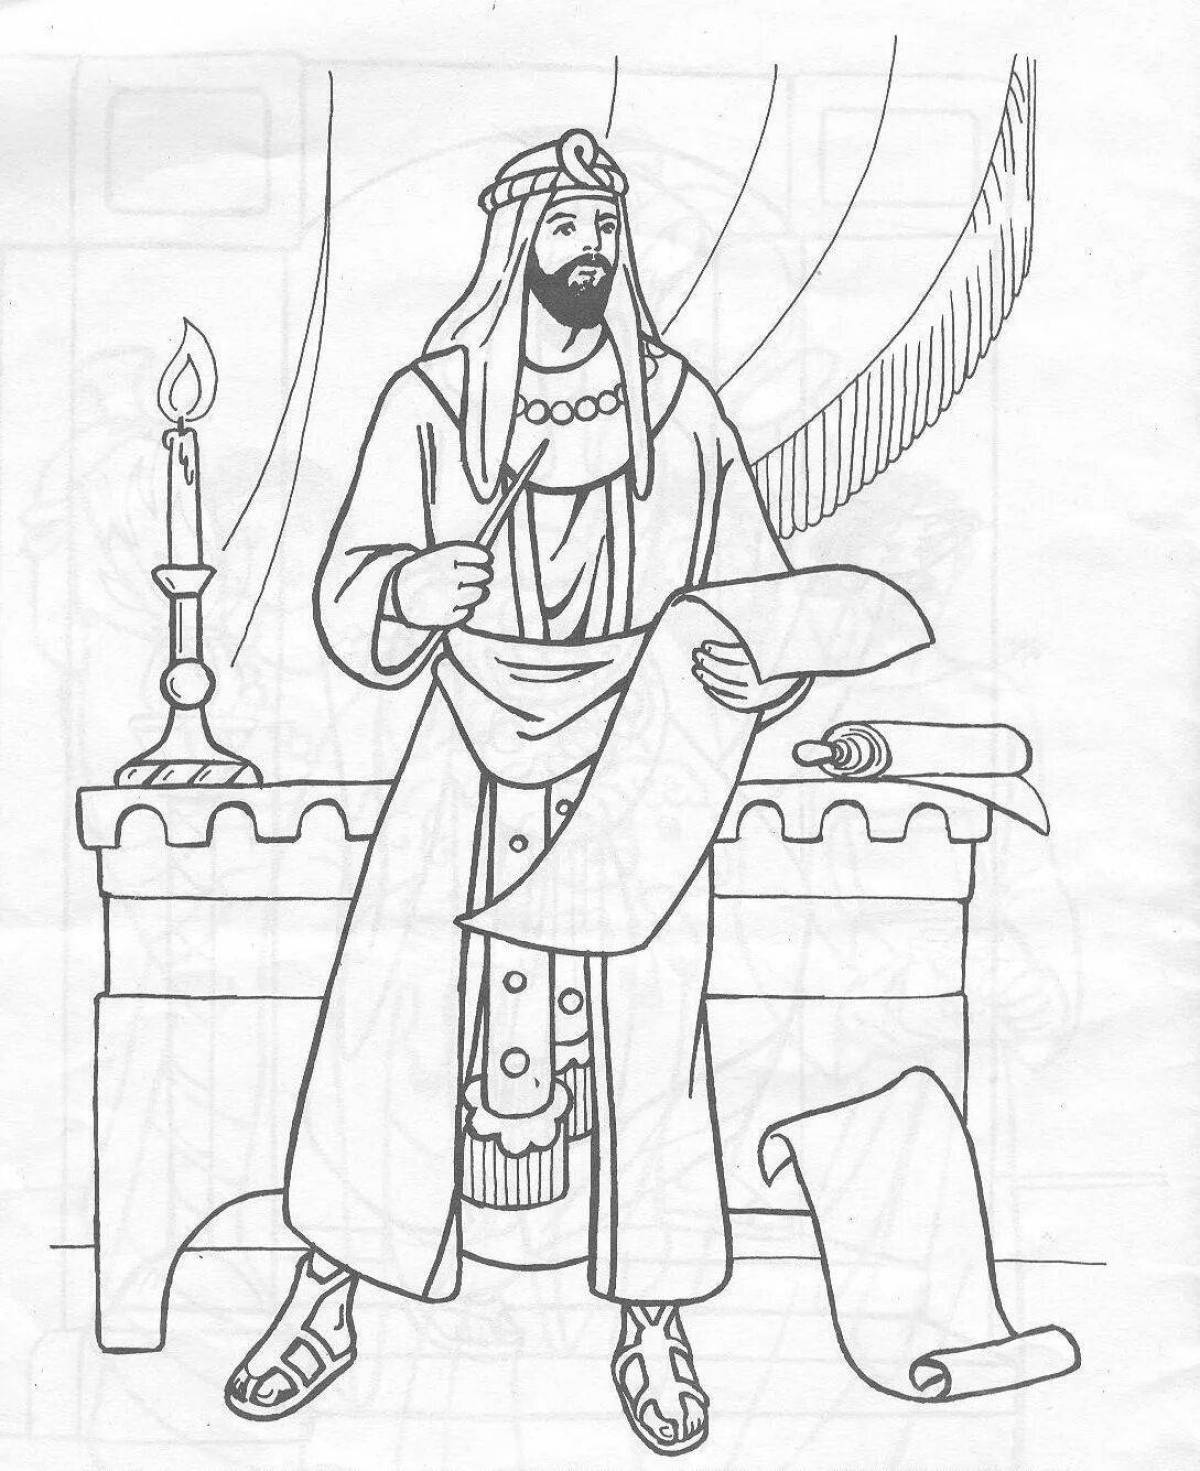 Brilliant prince vladimir red sun coloring page